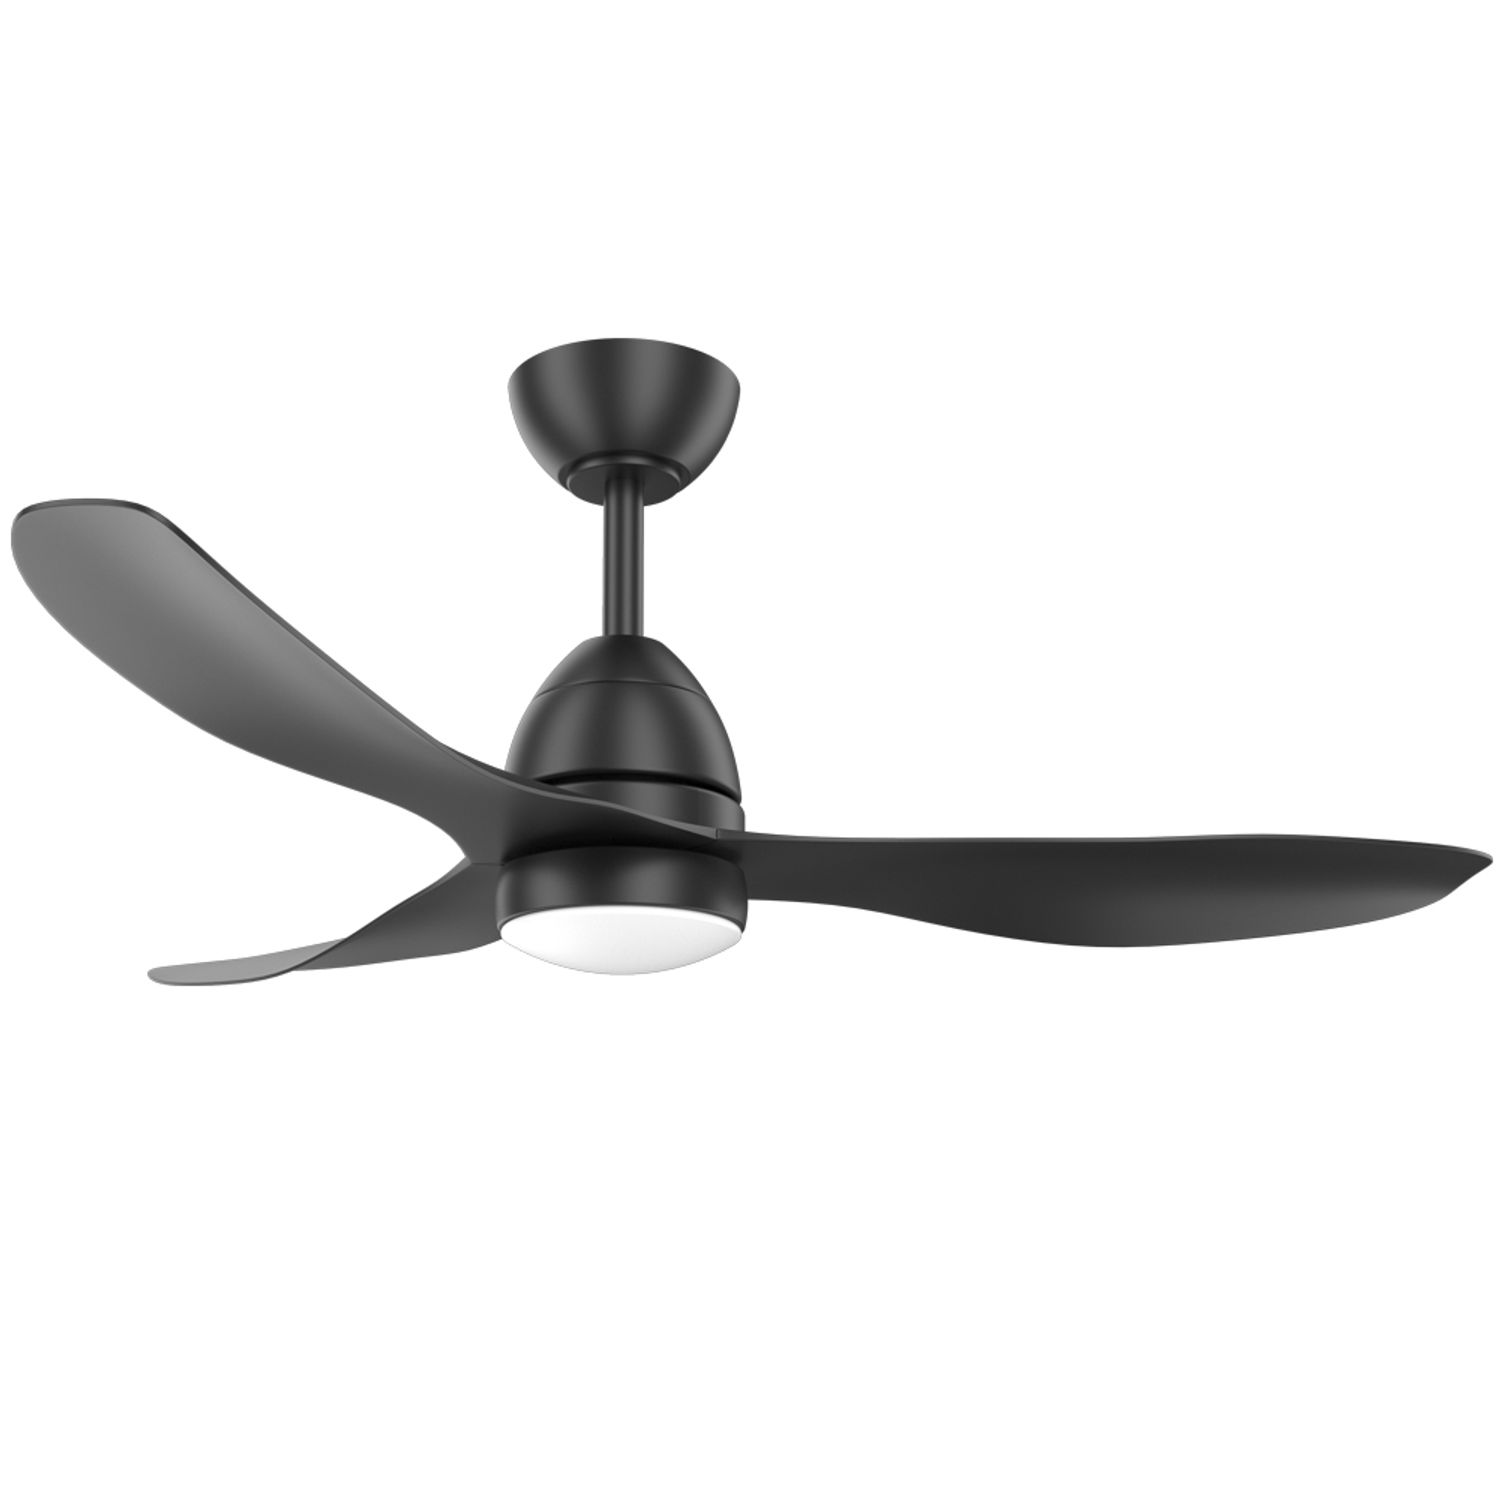 52" All Black Real Wood Ceiling Fan with Reversible Motor and LED Light